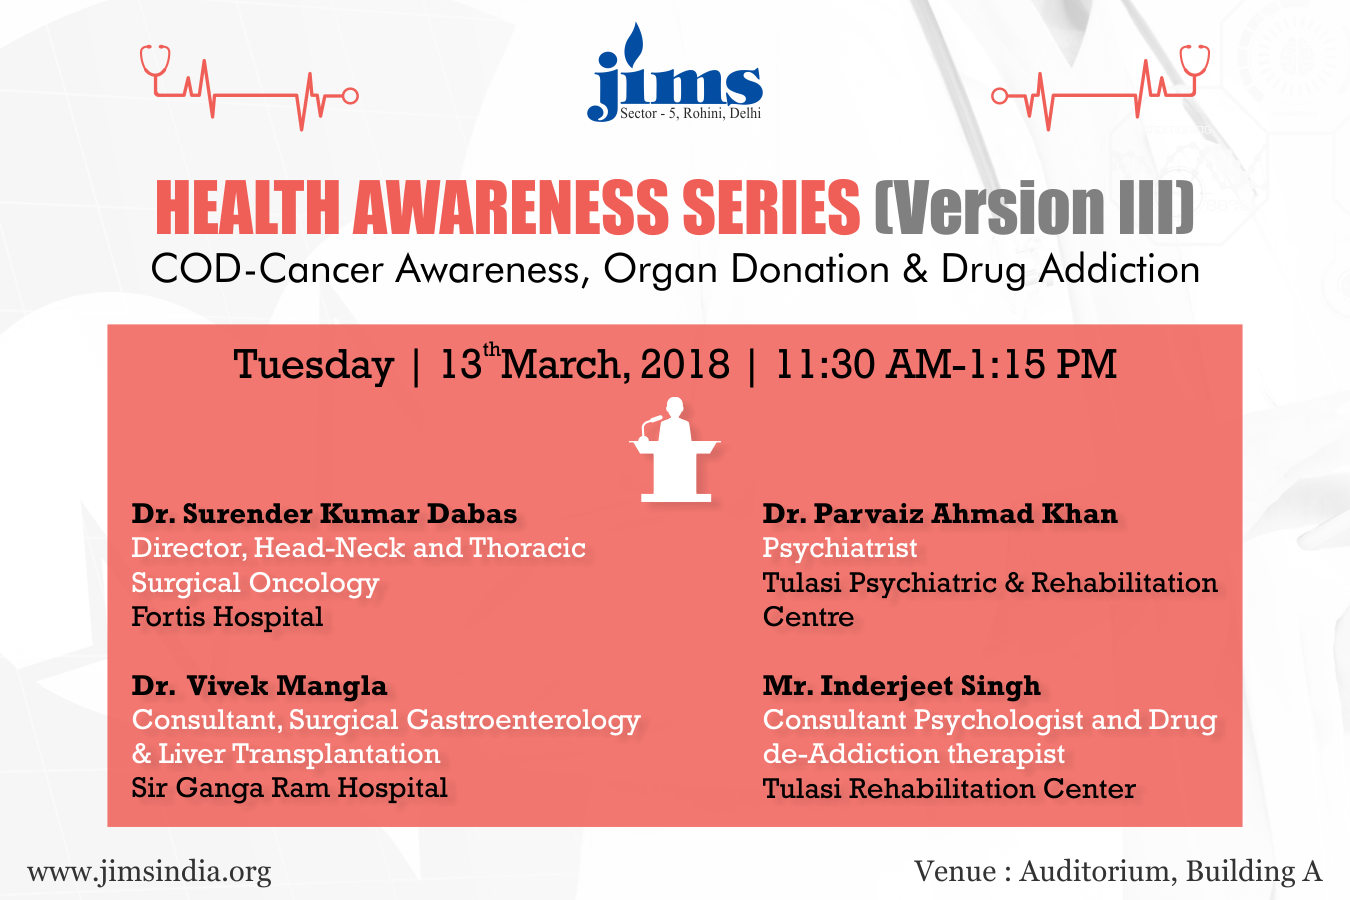 JIMS is organizing a Health Awareness Series (Version III) on Tuesday 13th March 2018